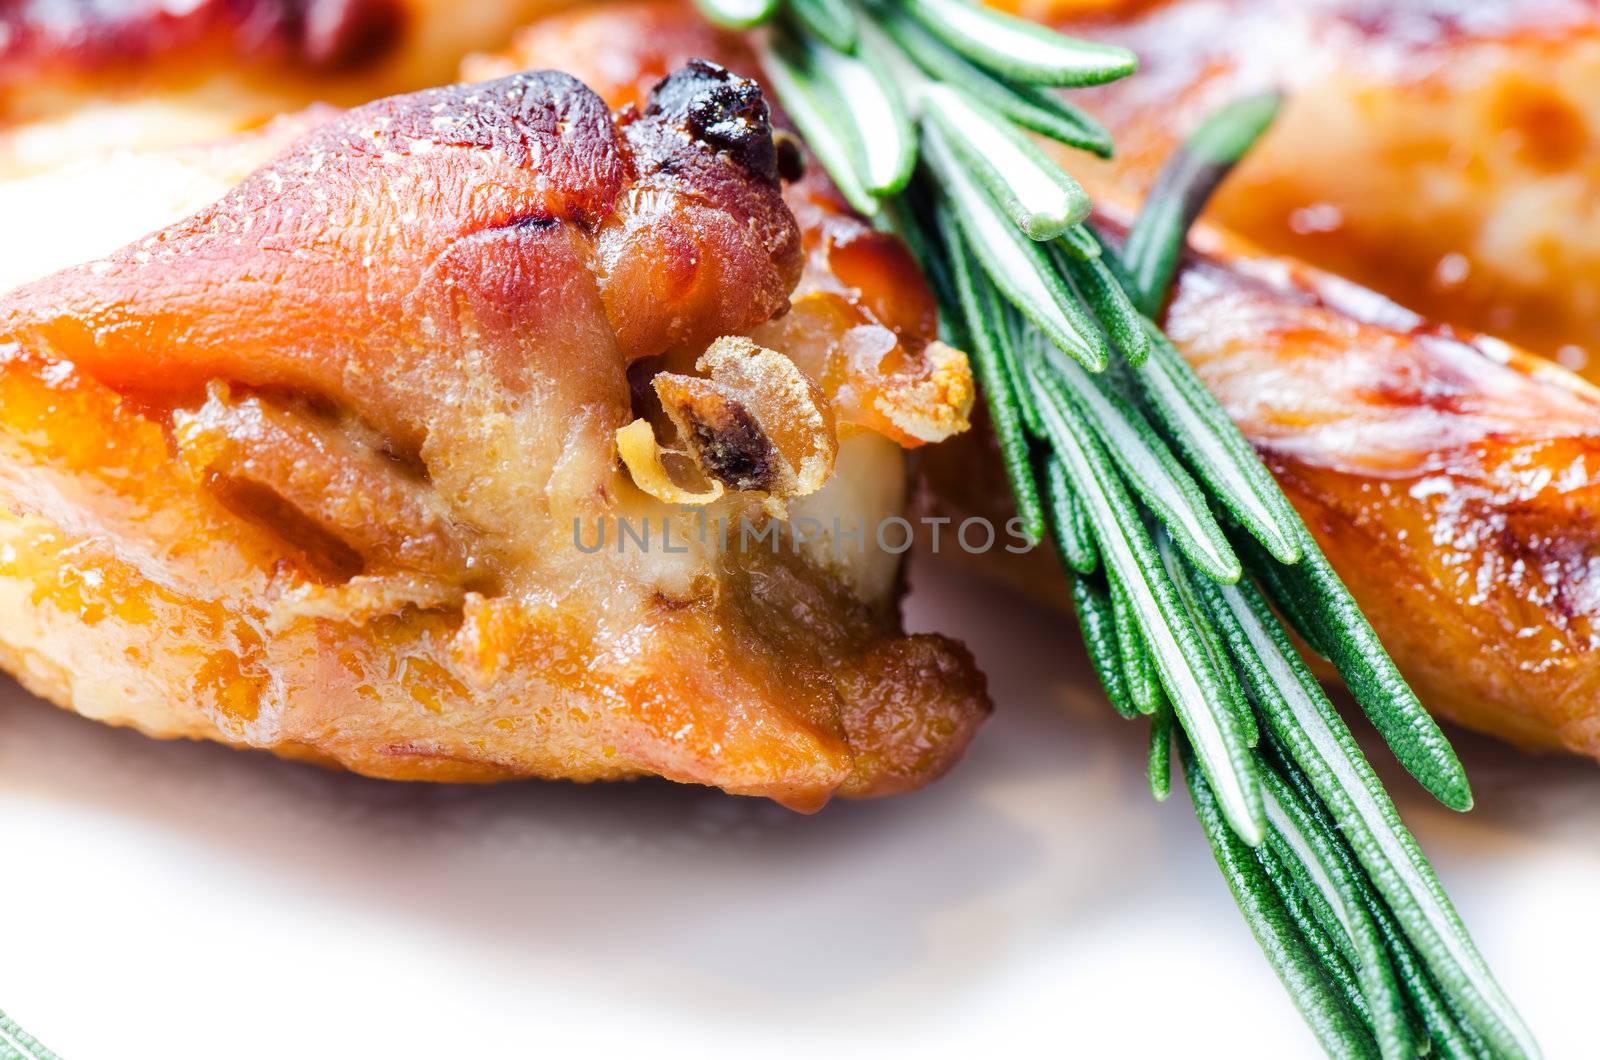 Fried chicken wings with a sprig of rosemary by Nanisimova